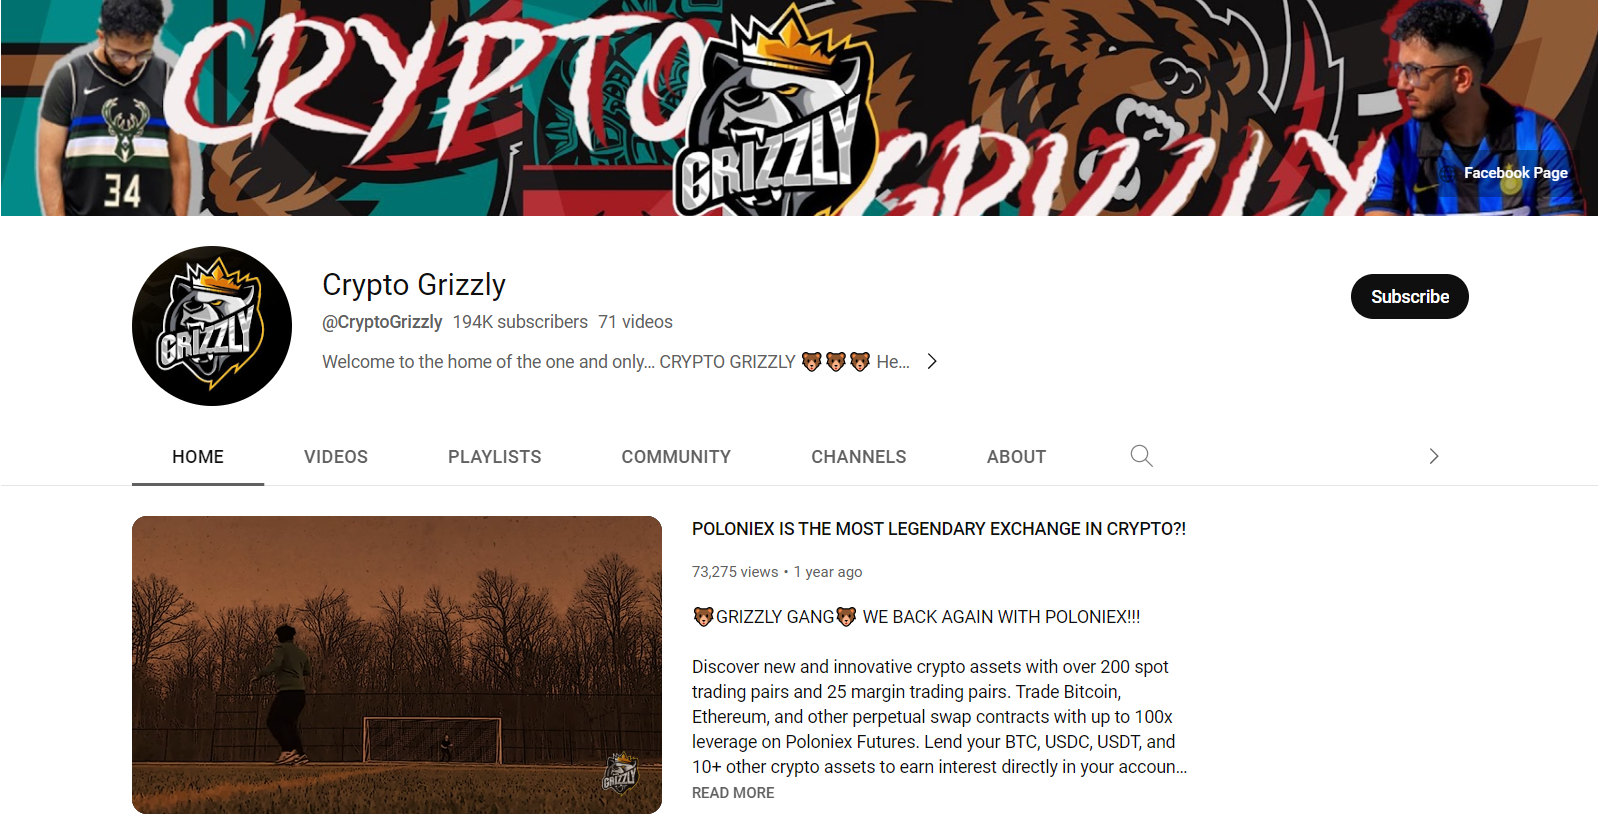 Crypto Grizzly